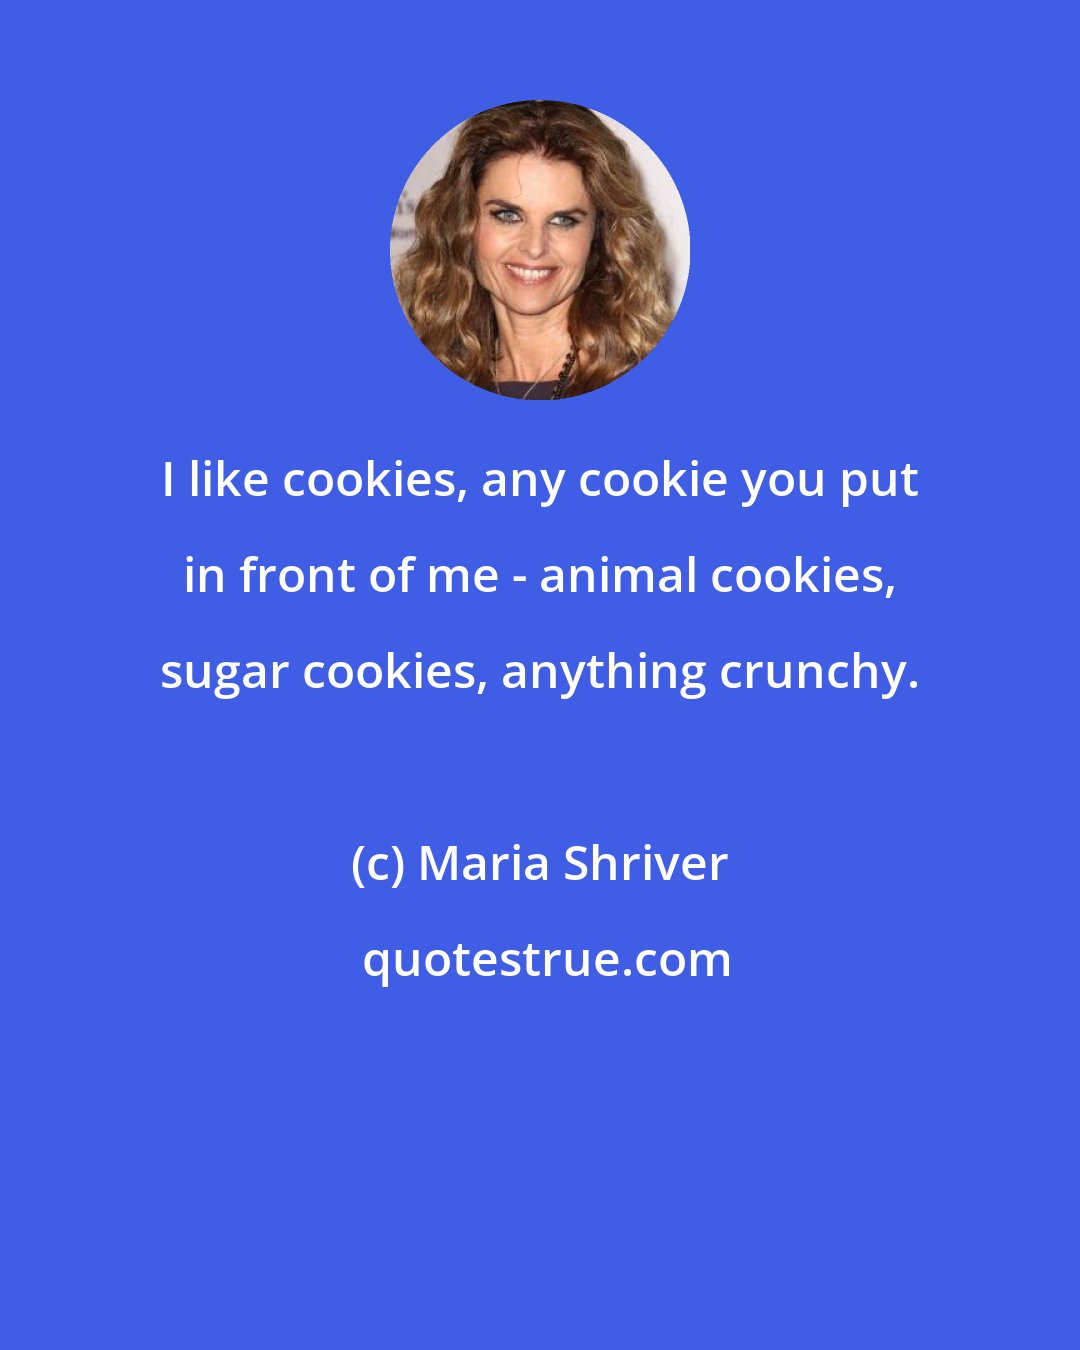 Maria Shriver: I like cookies, any cookie you put in front of me - animal cookies, sugar cookies, anything crunchy.